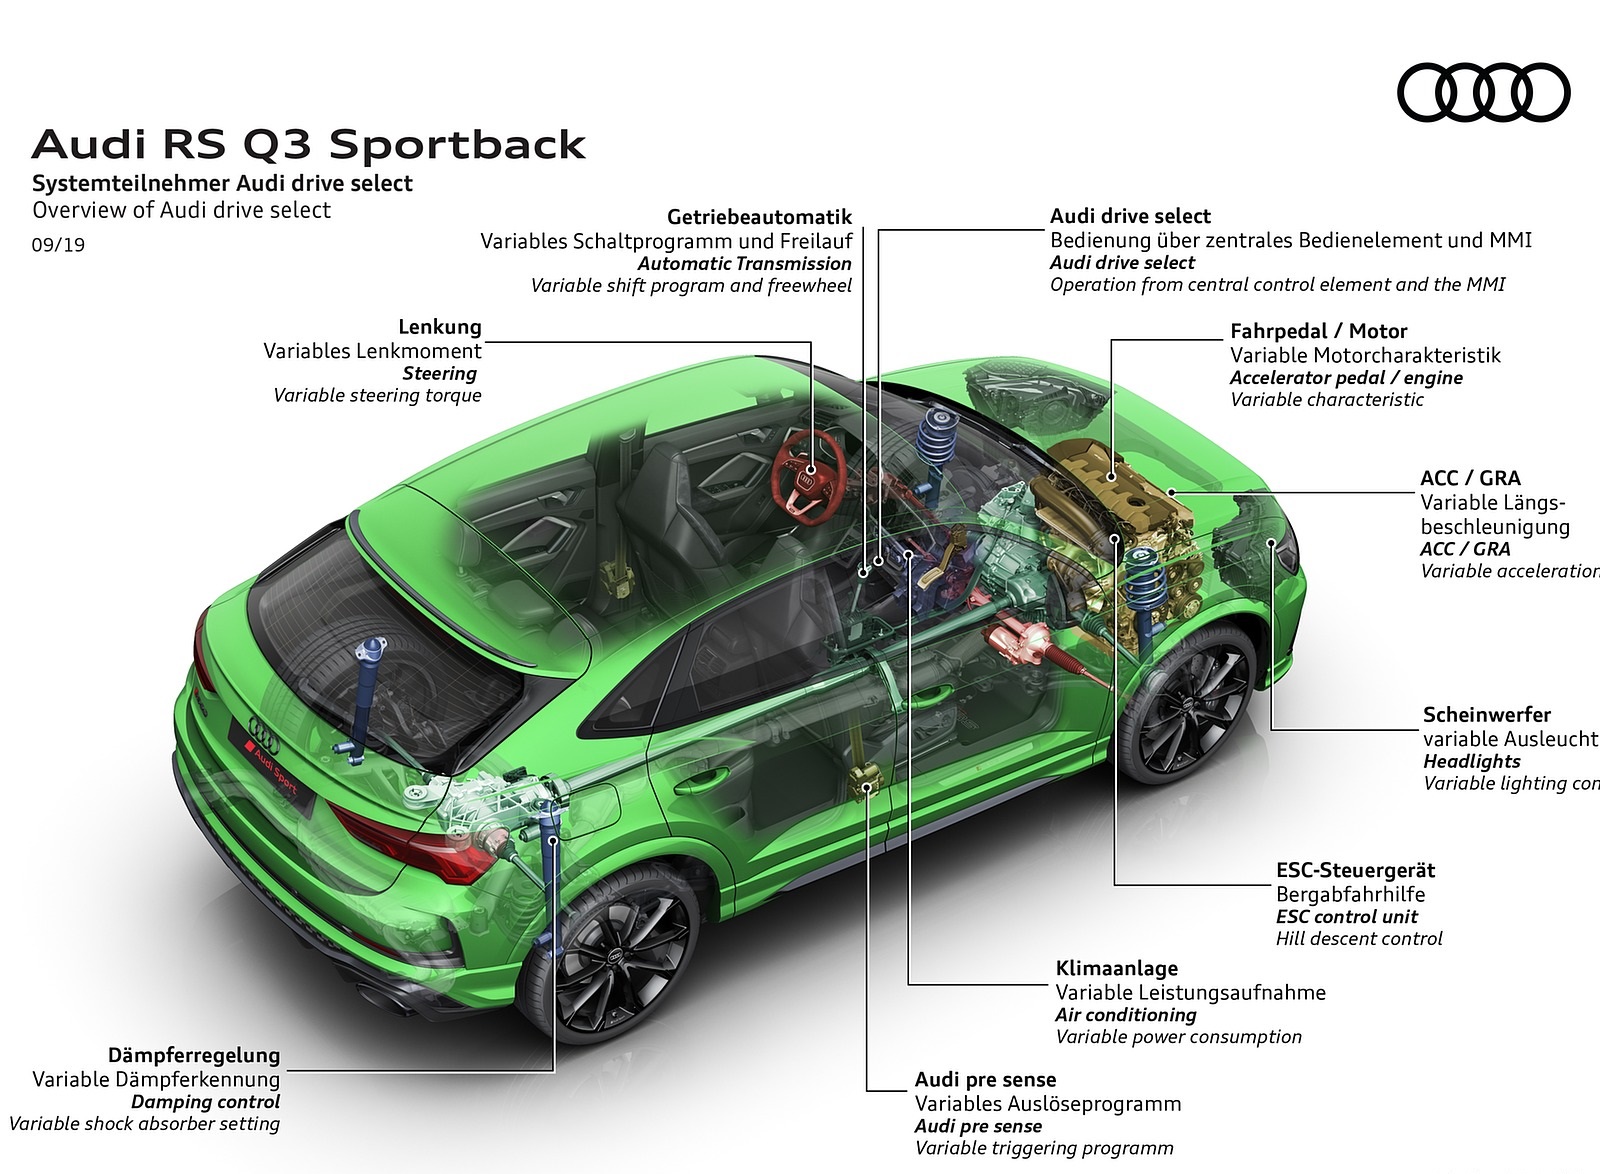 2020 Audi RS Q3 Sportback Overview of Audi drive select Wallpapers #112 of 127